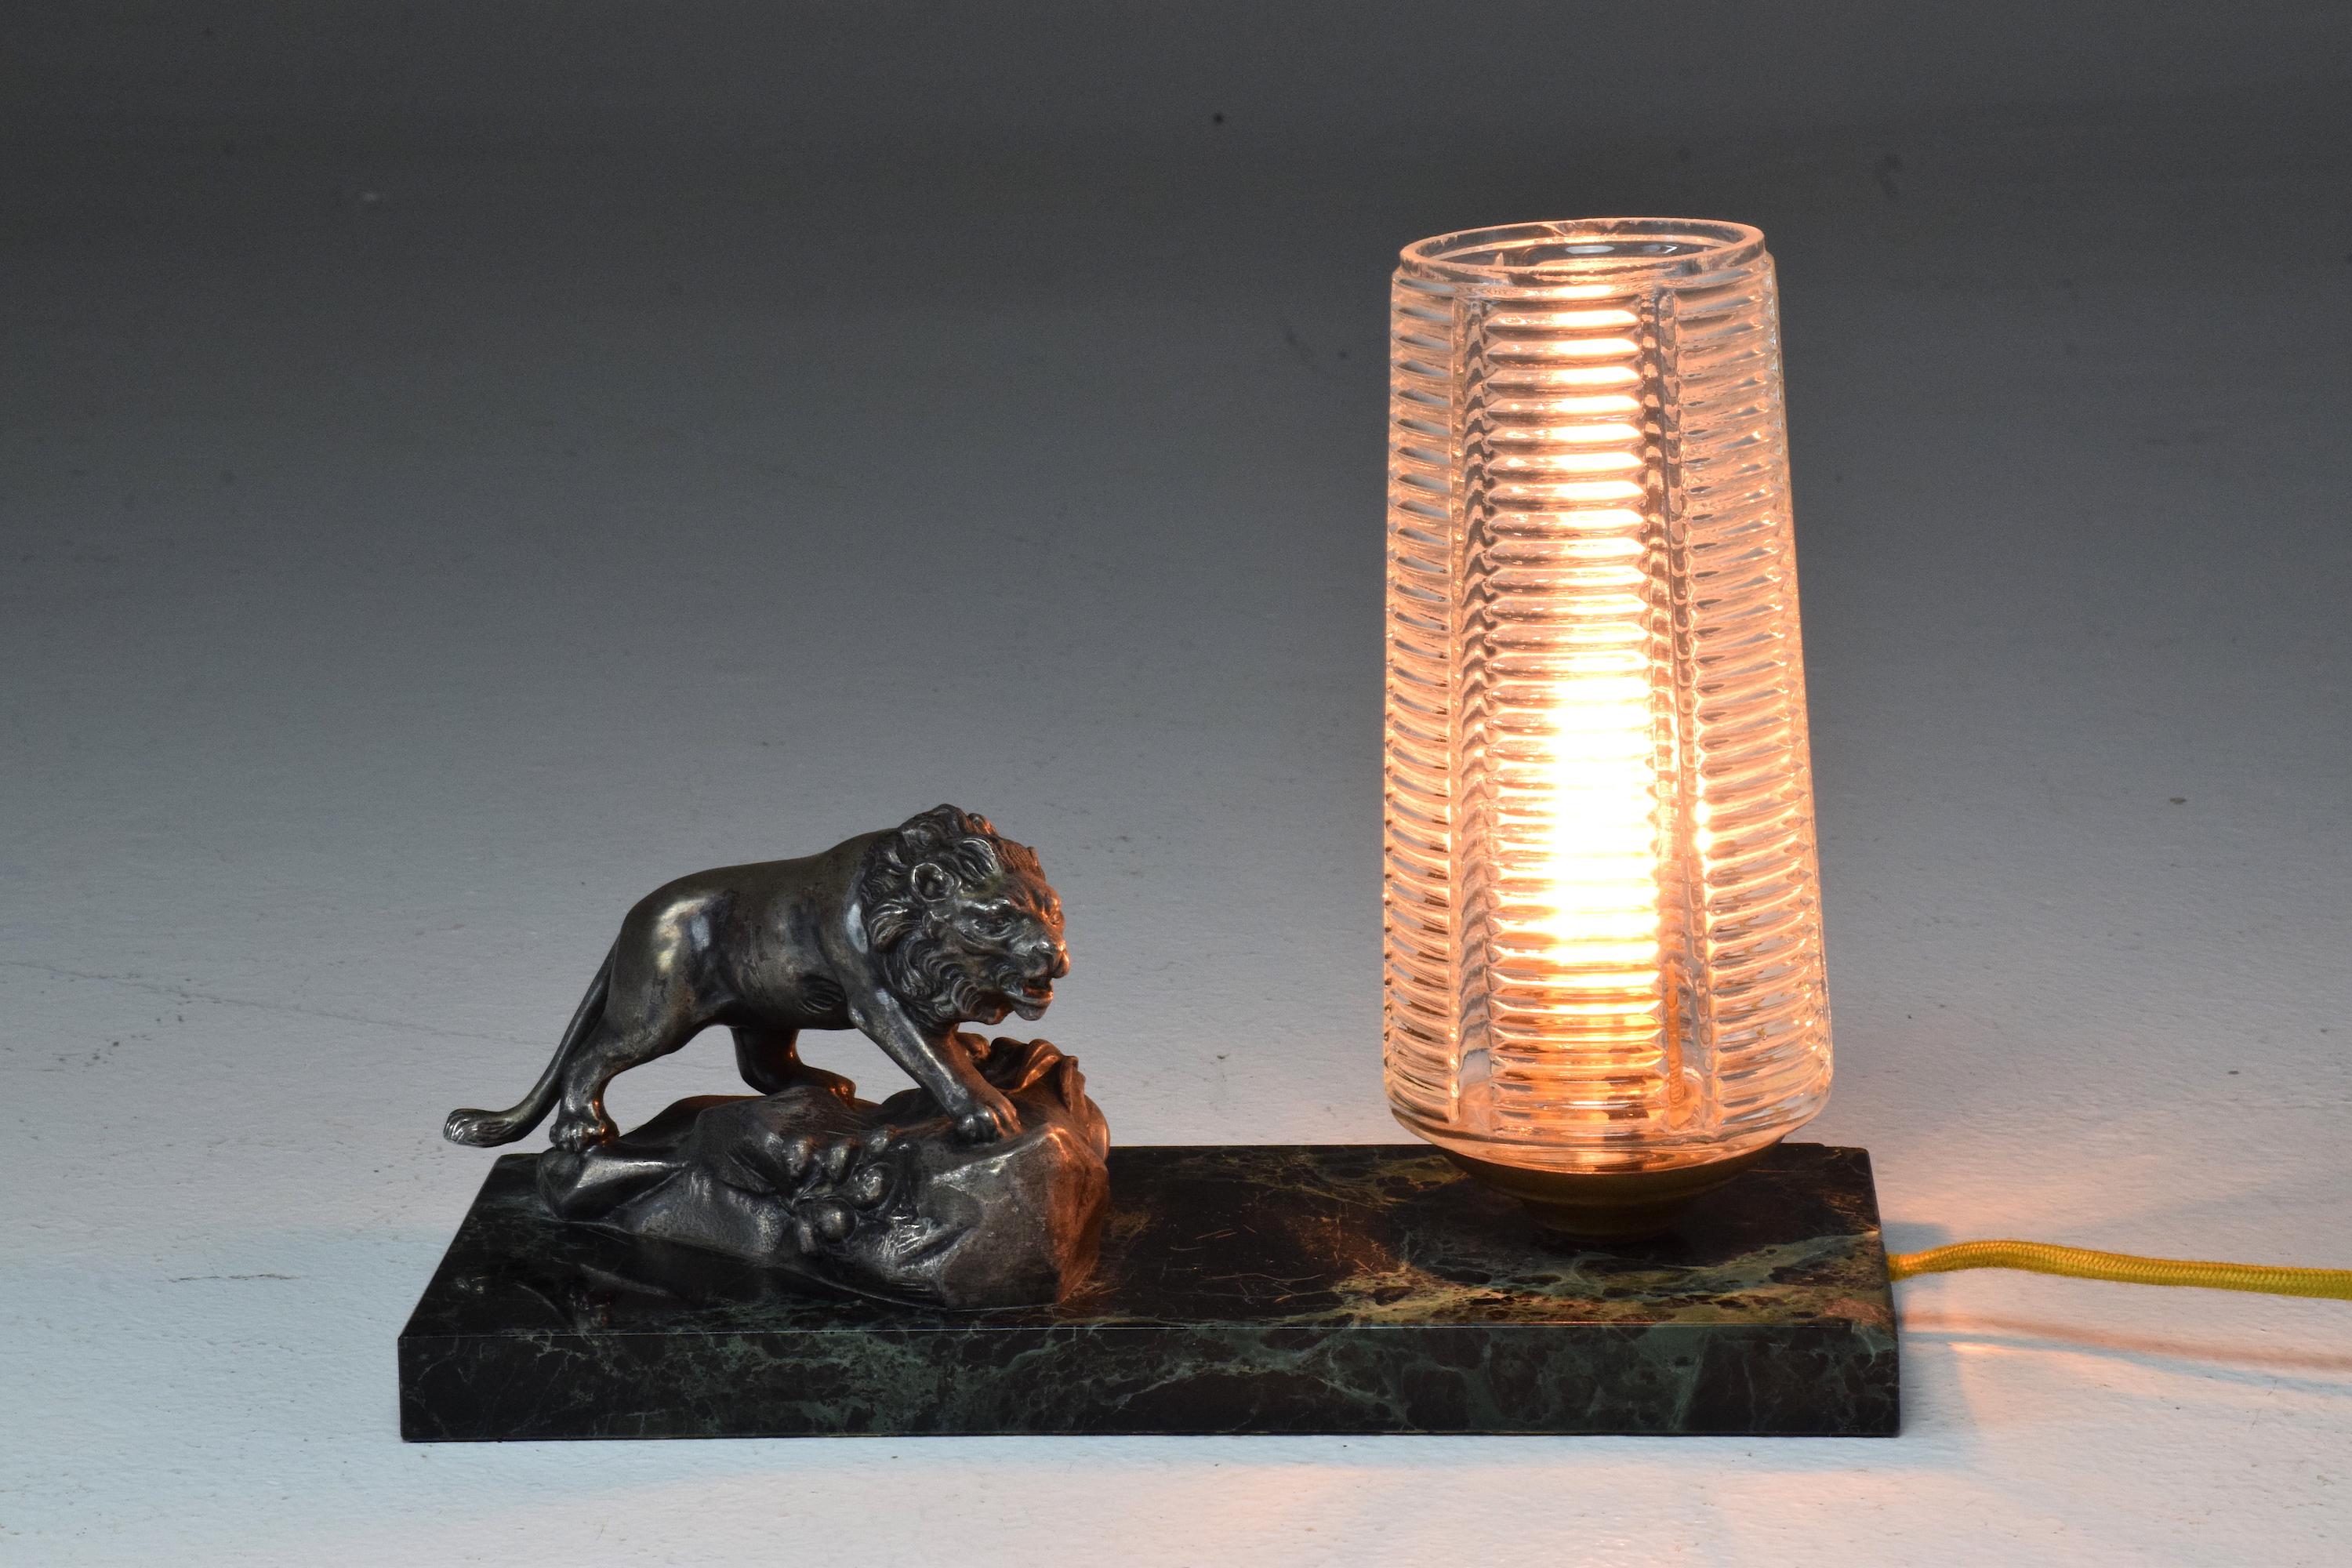 A 20th century French vintage pure Art Deco table lamp or bedside lamp designed with a green marble rectangular base, a textured glass removable shade and a heavy bronze lion figurine. 

Rewired and tested.